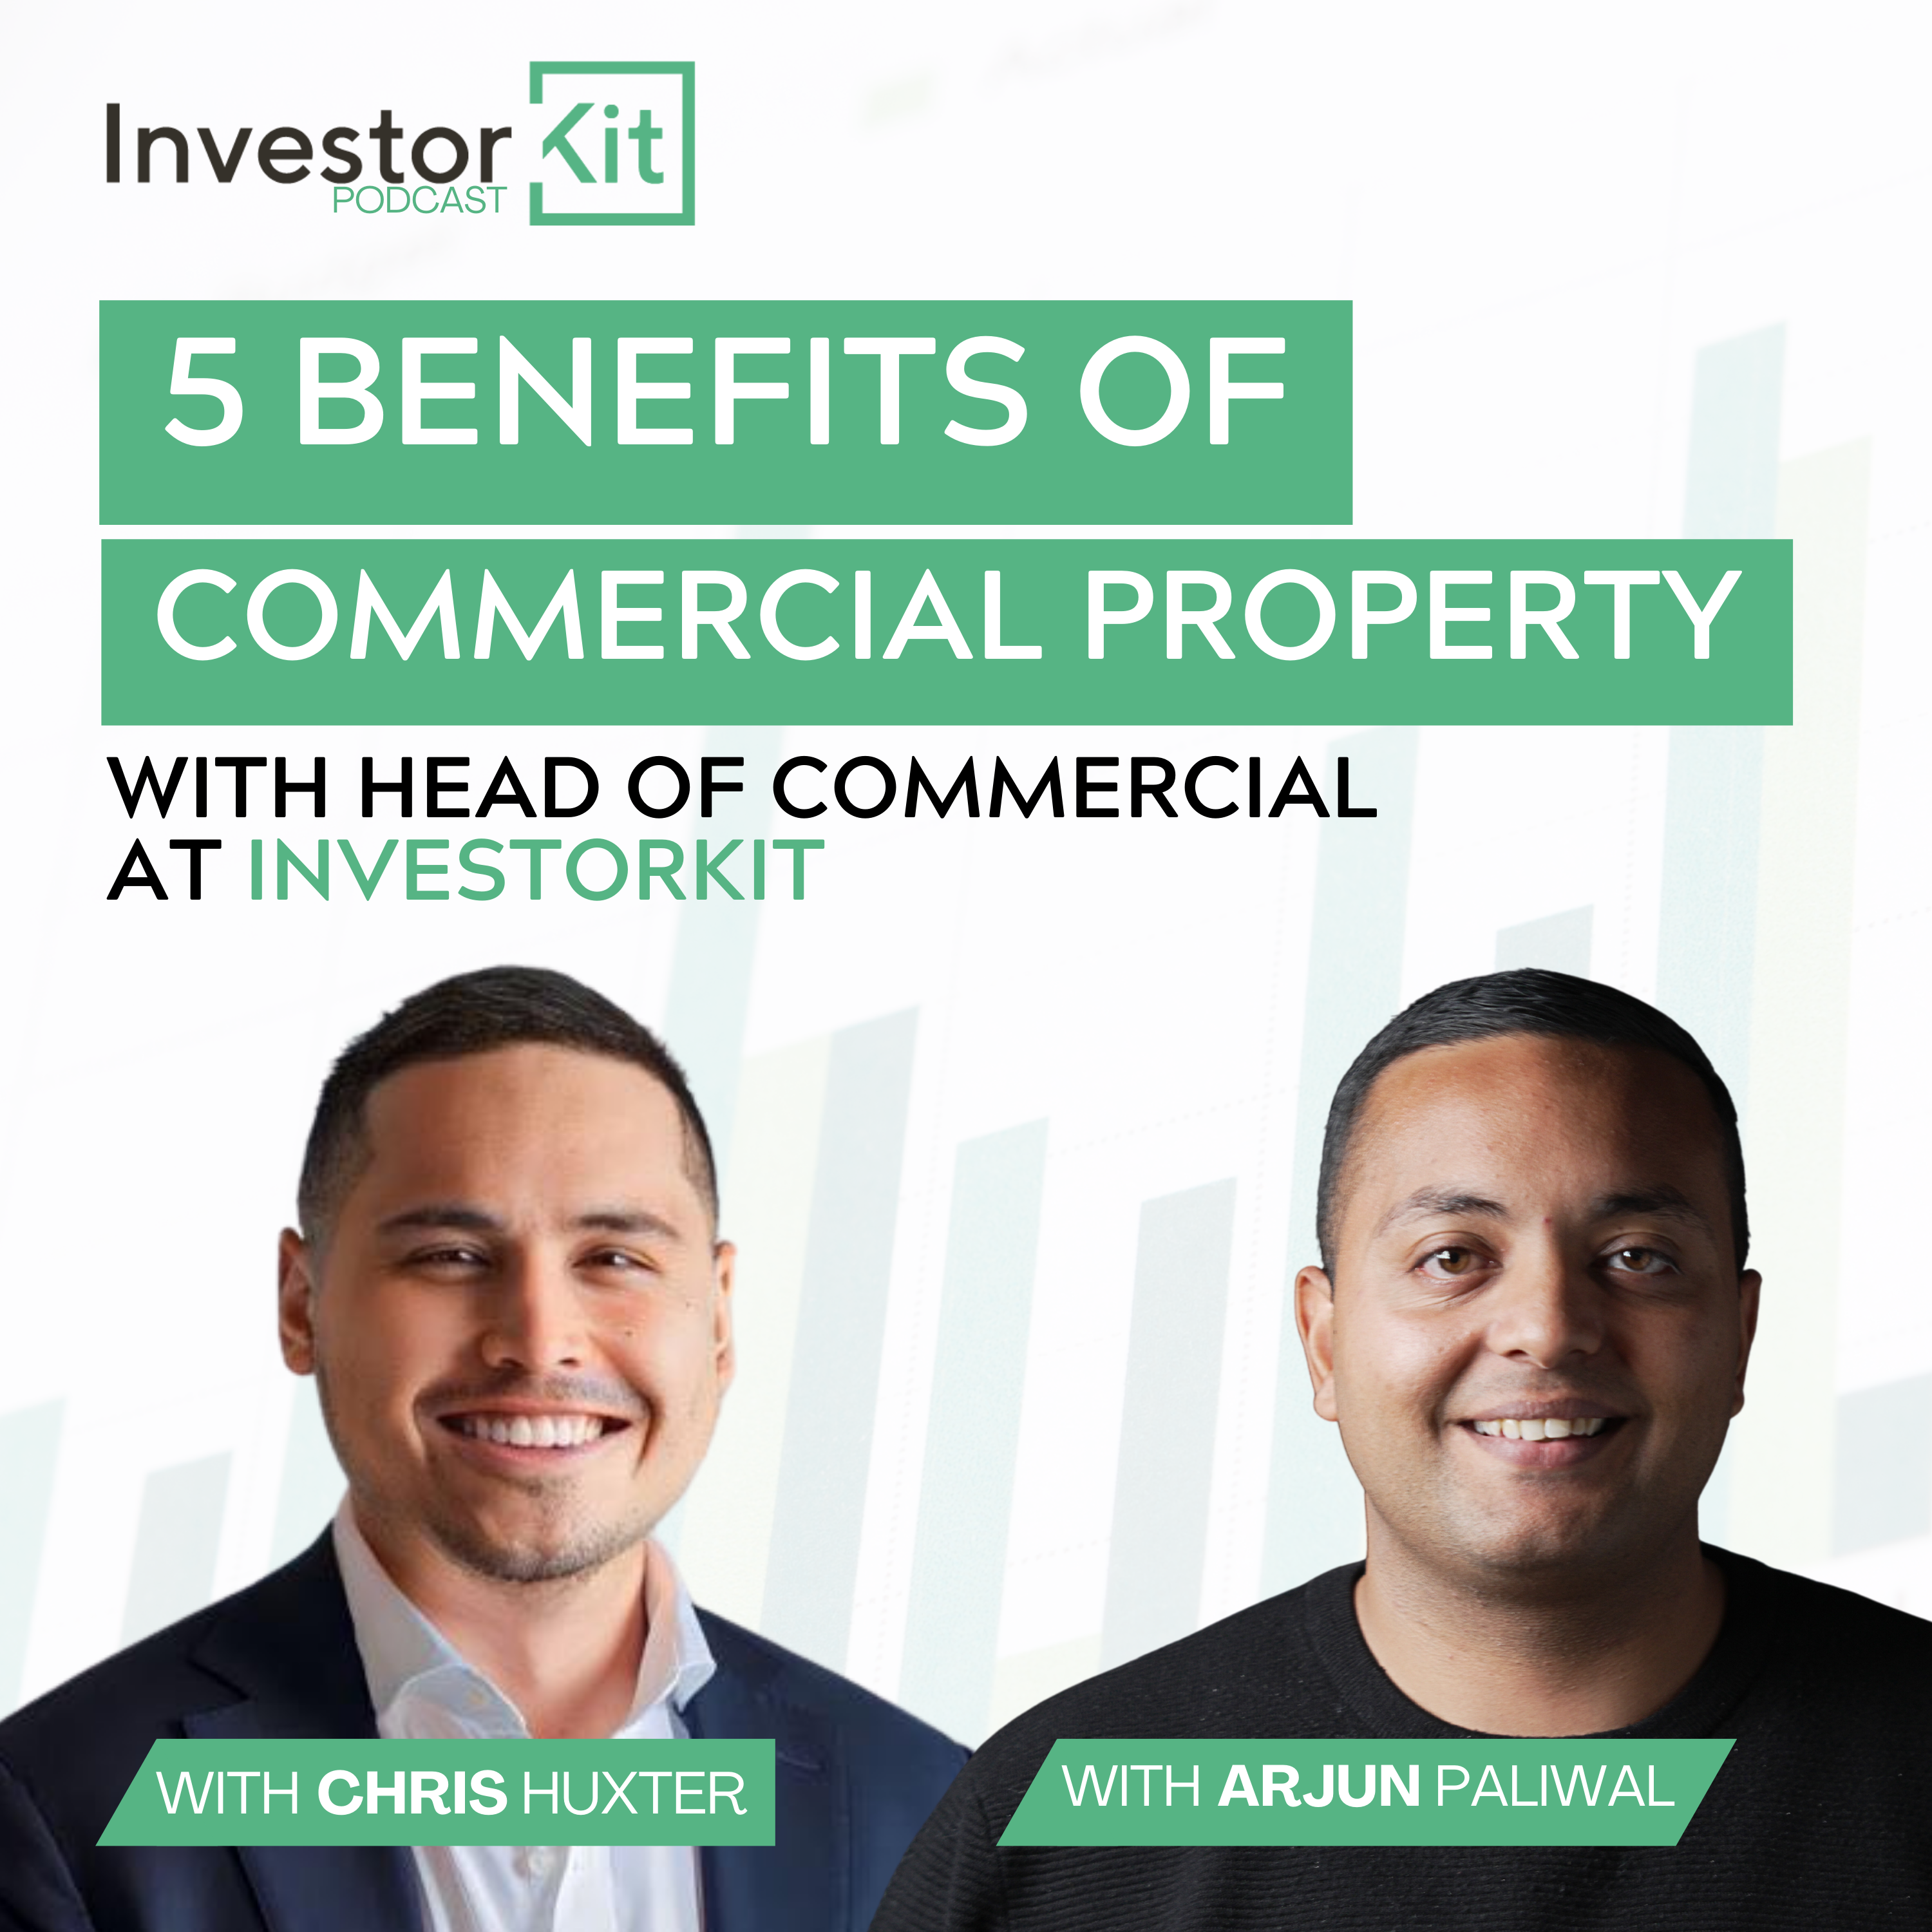 5 Benefits of Investing in Commercial Property! With Head of Commercial, Chris Huxter